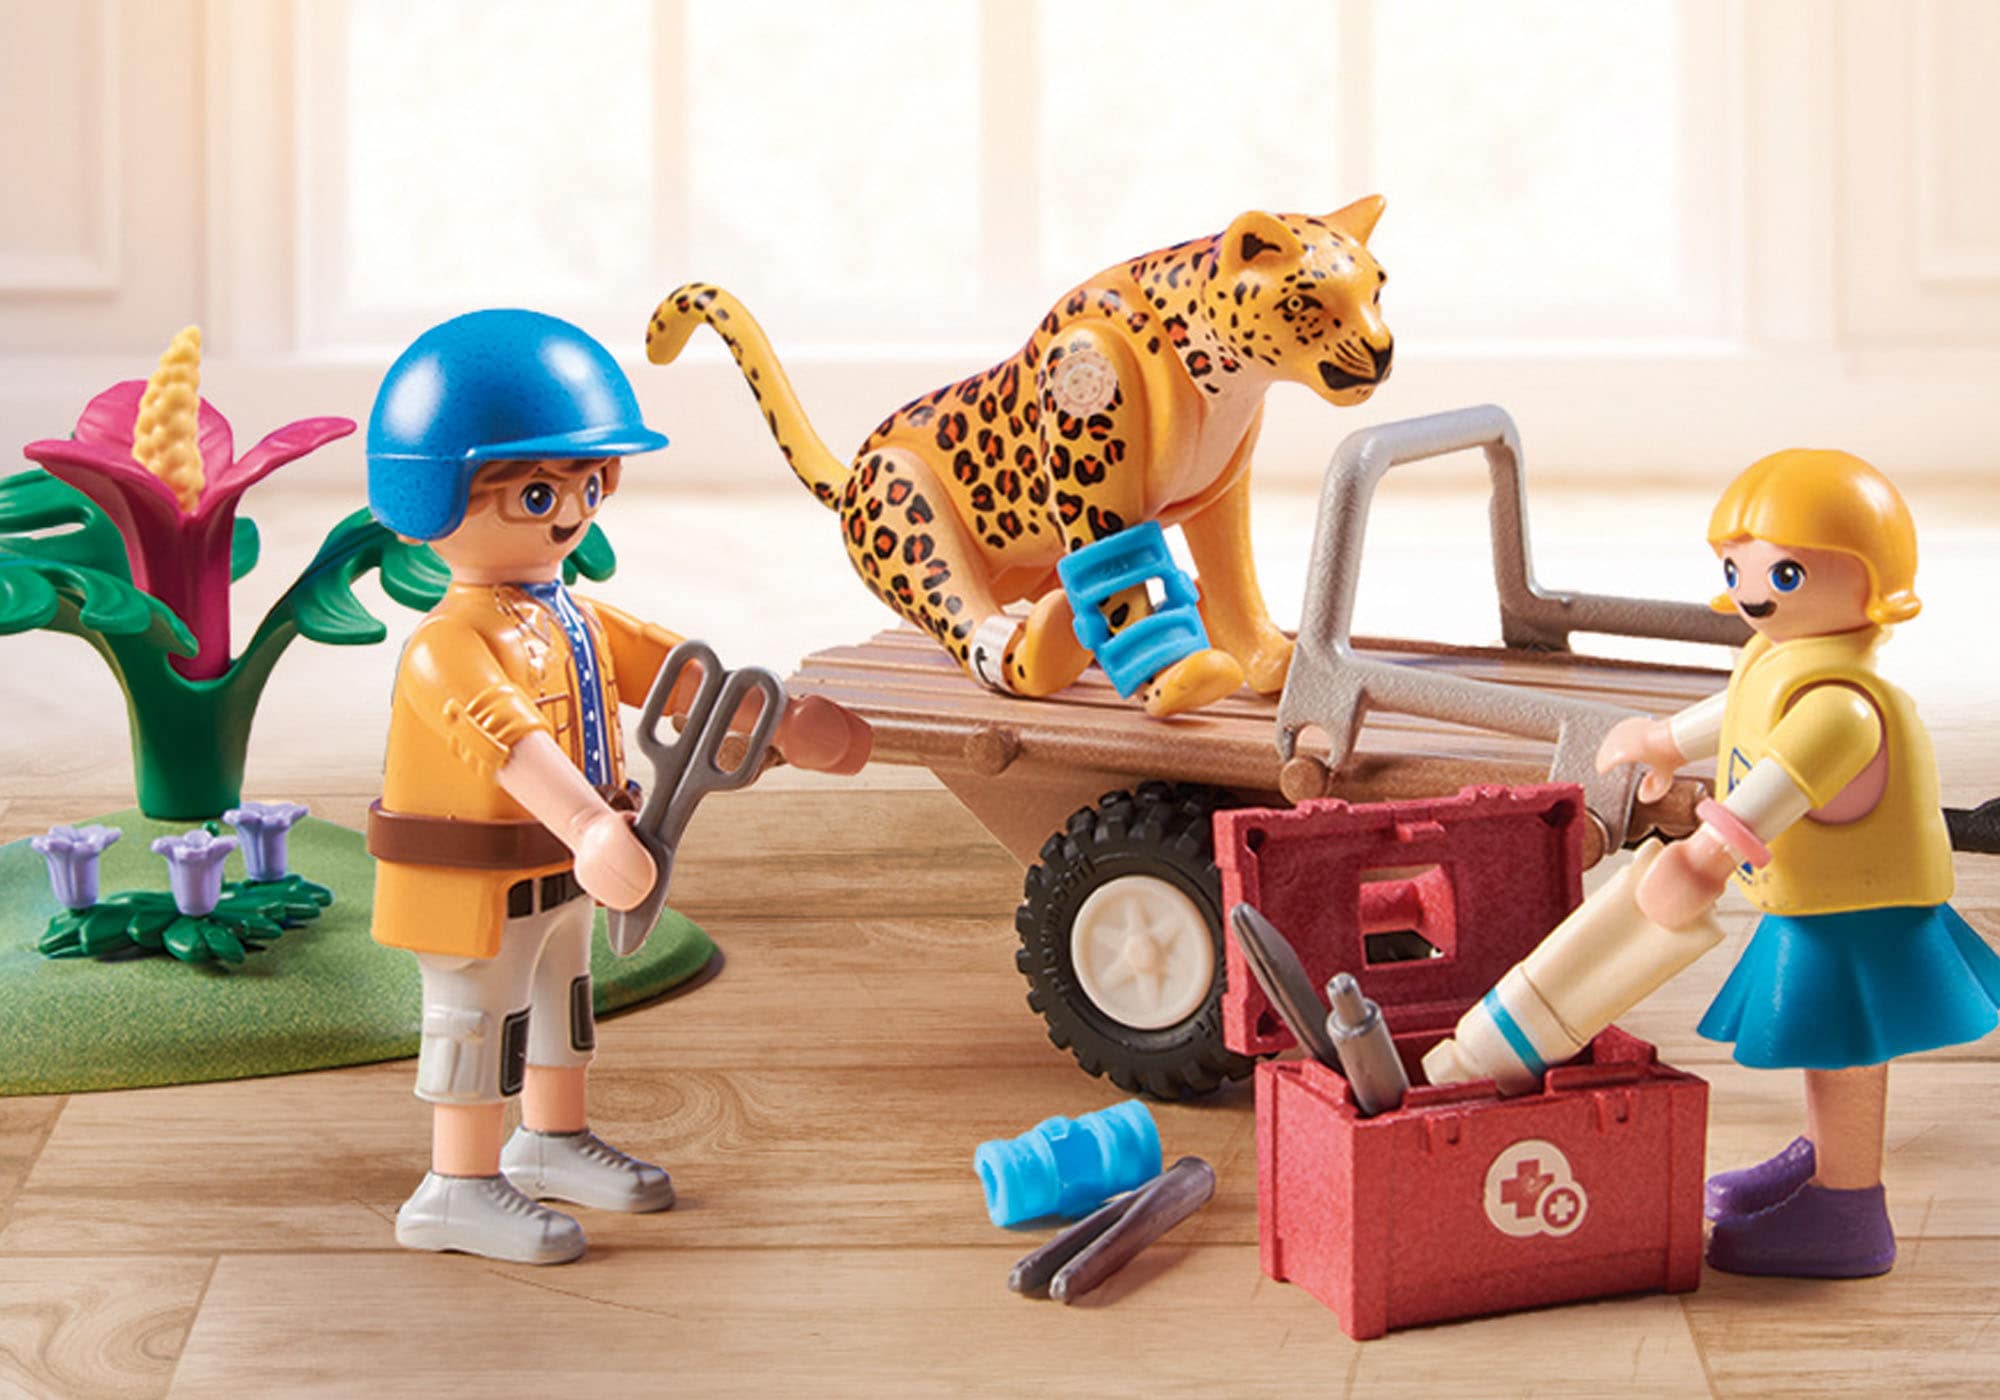 Playmobil® Konstruktions-Spielset »Wiltopia - Tierrettungs-Quad (71011), Wiltopia«, (58 St.), teilweise aus recyceltem Material; Made in Europe